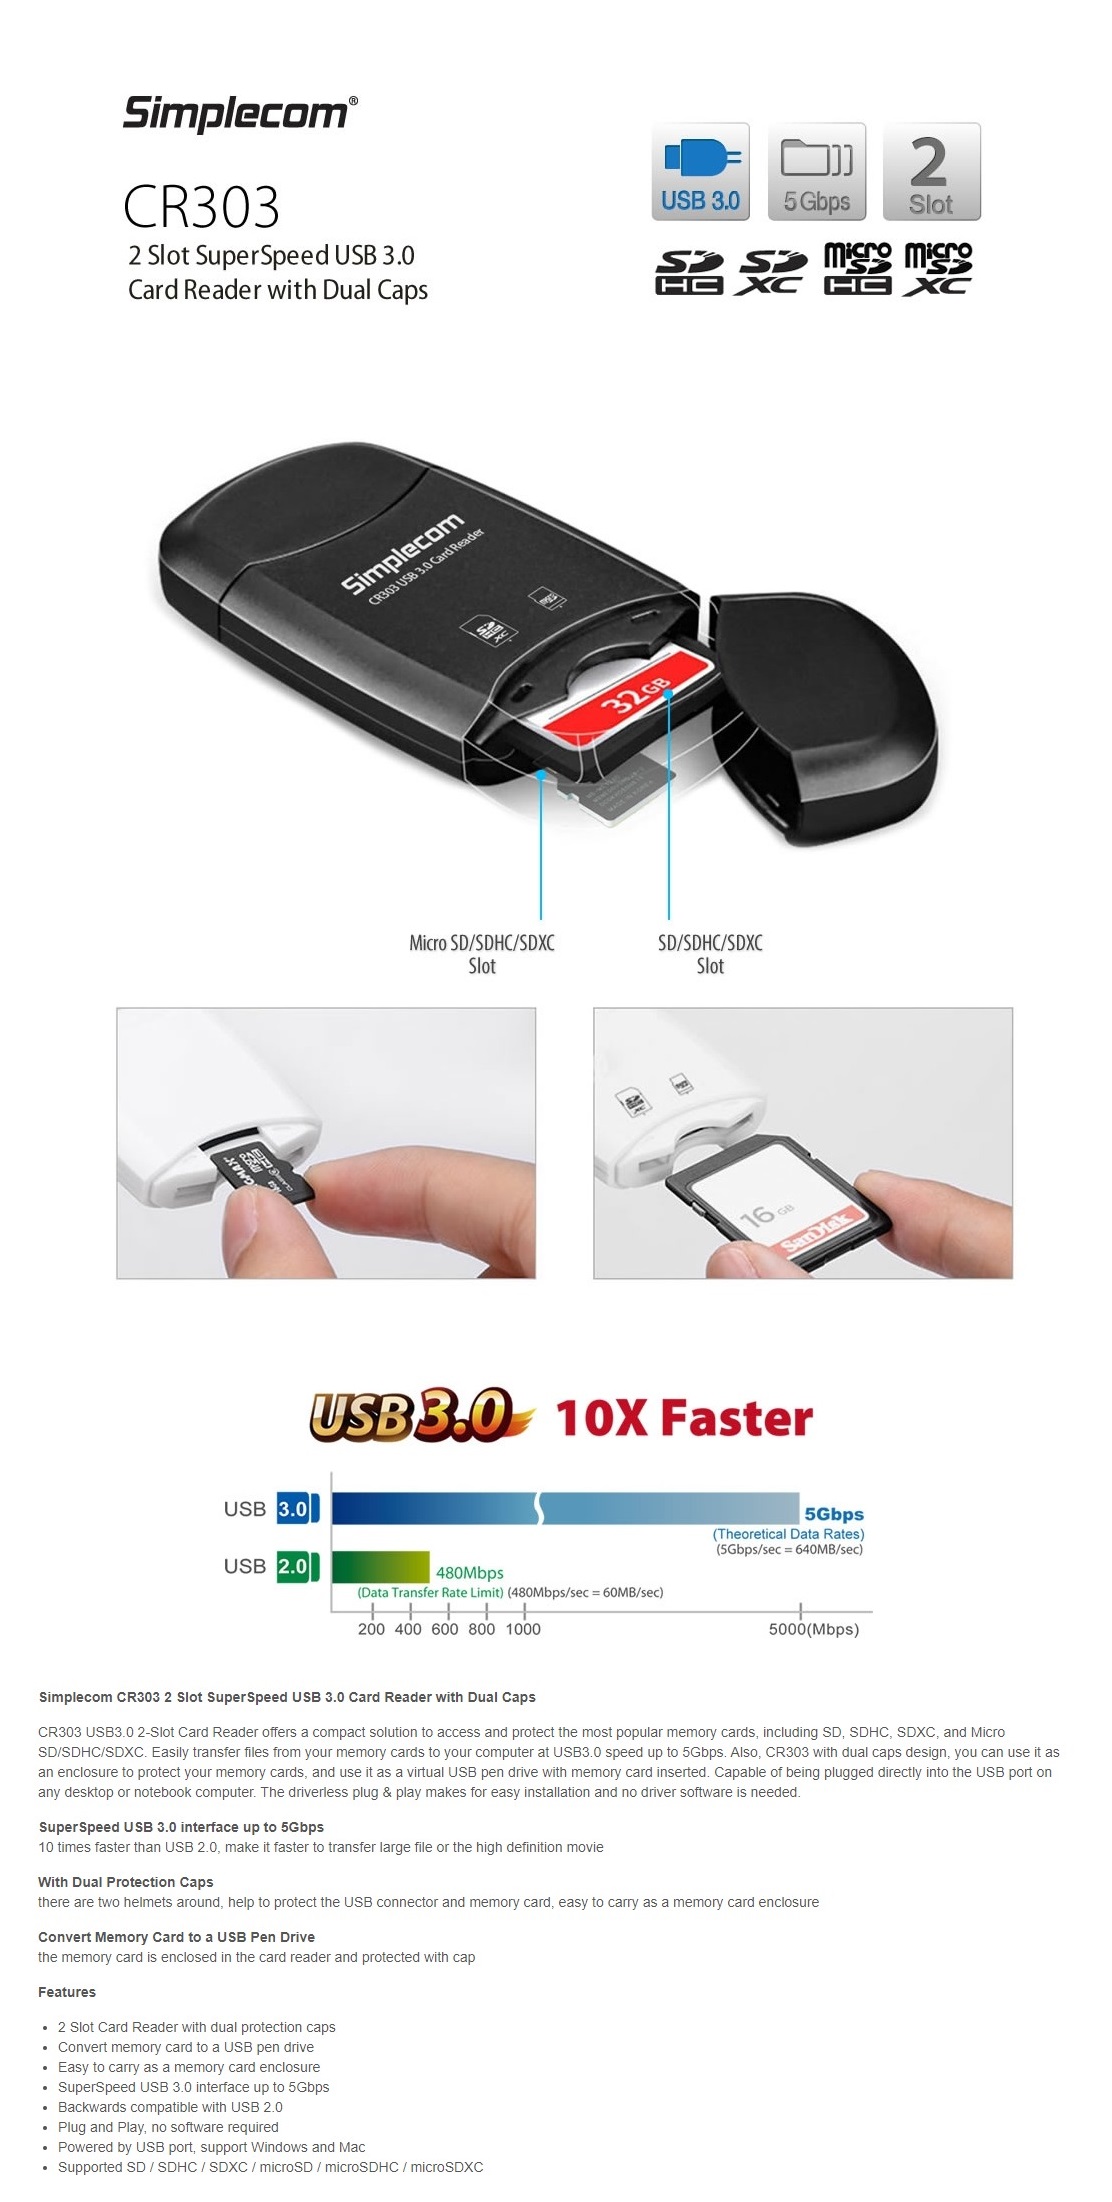 A large marketing image providing additional information about the product Simplecom CR303 2-Slot SuperSpeed USB 3.0 Card Reader - Black - Additional alt info not provided